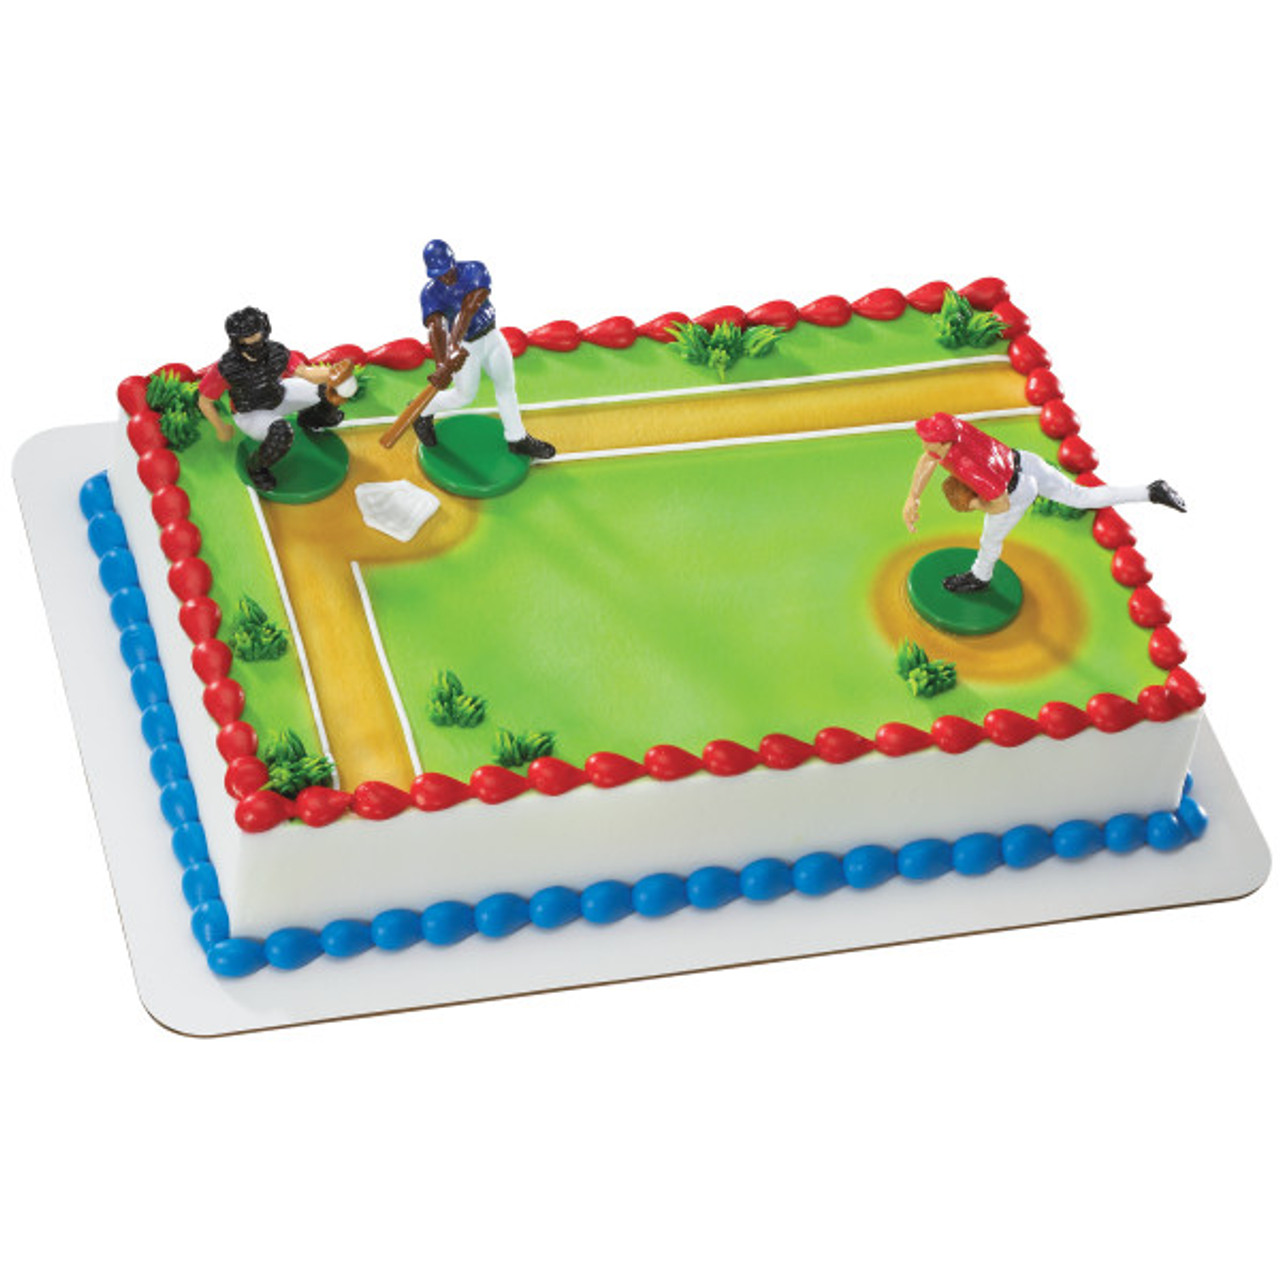 Baseball cakes : HERE Discover the most popular ideas ❤️